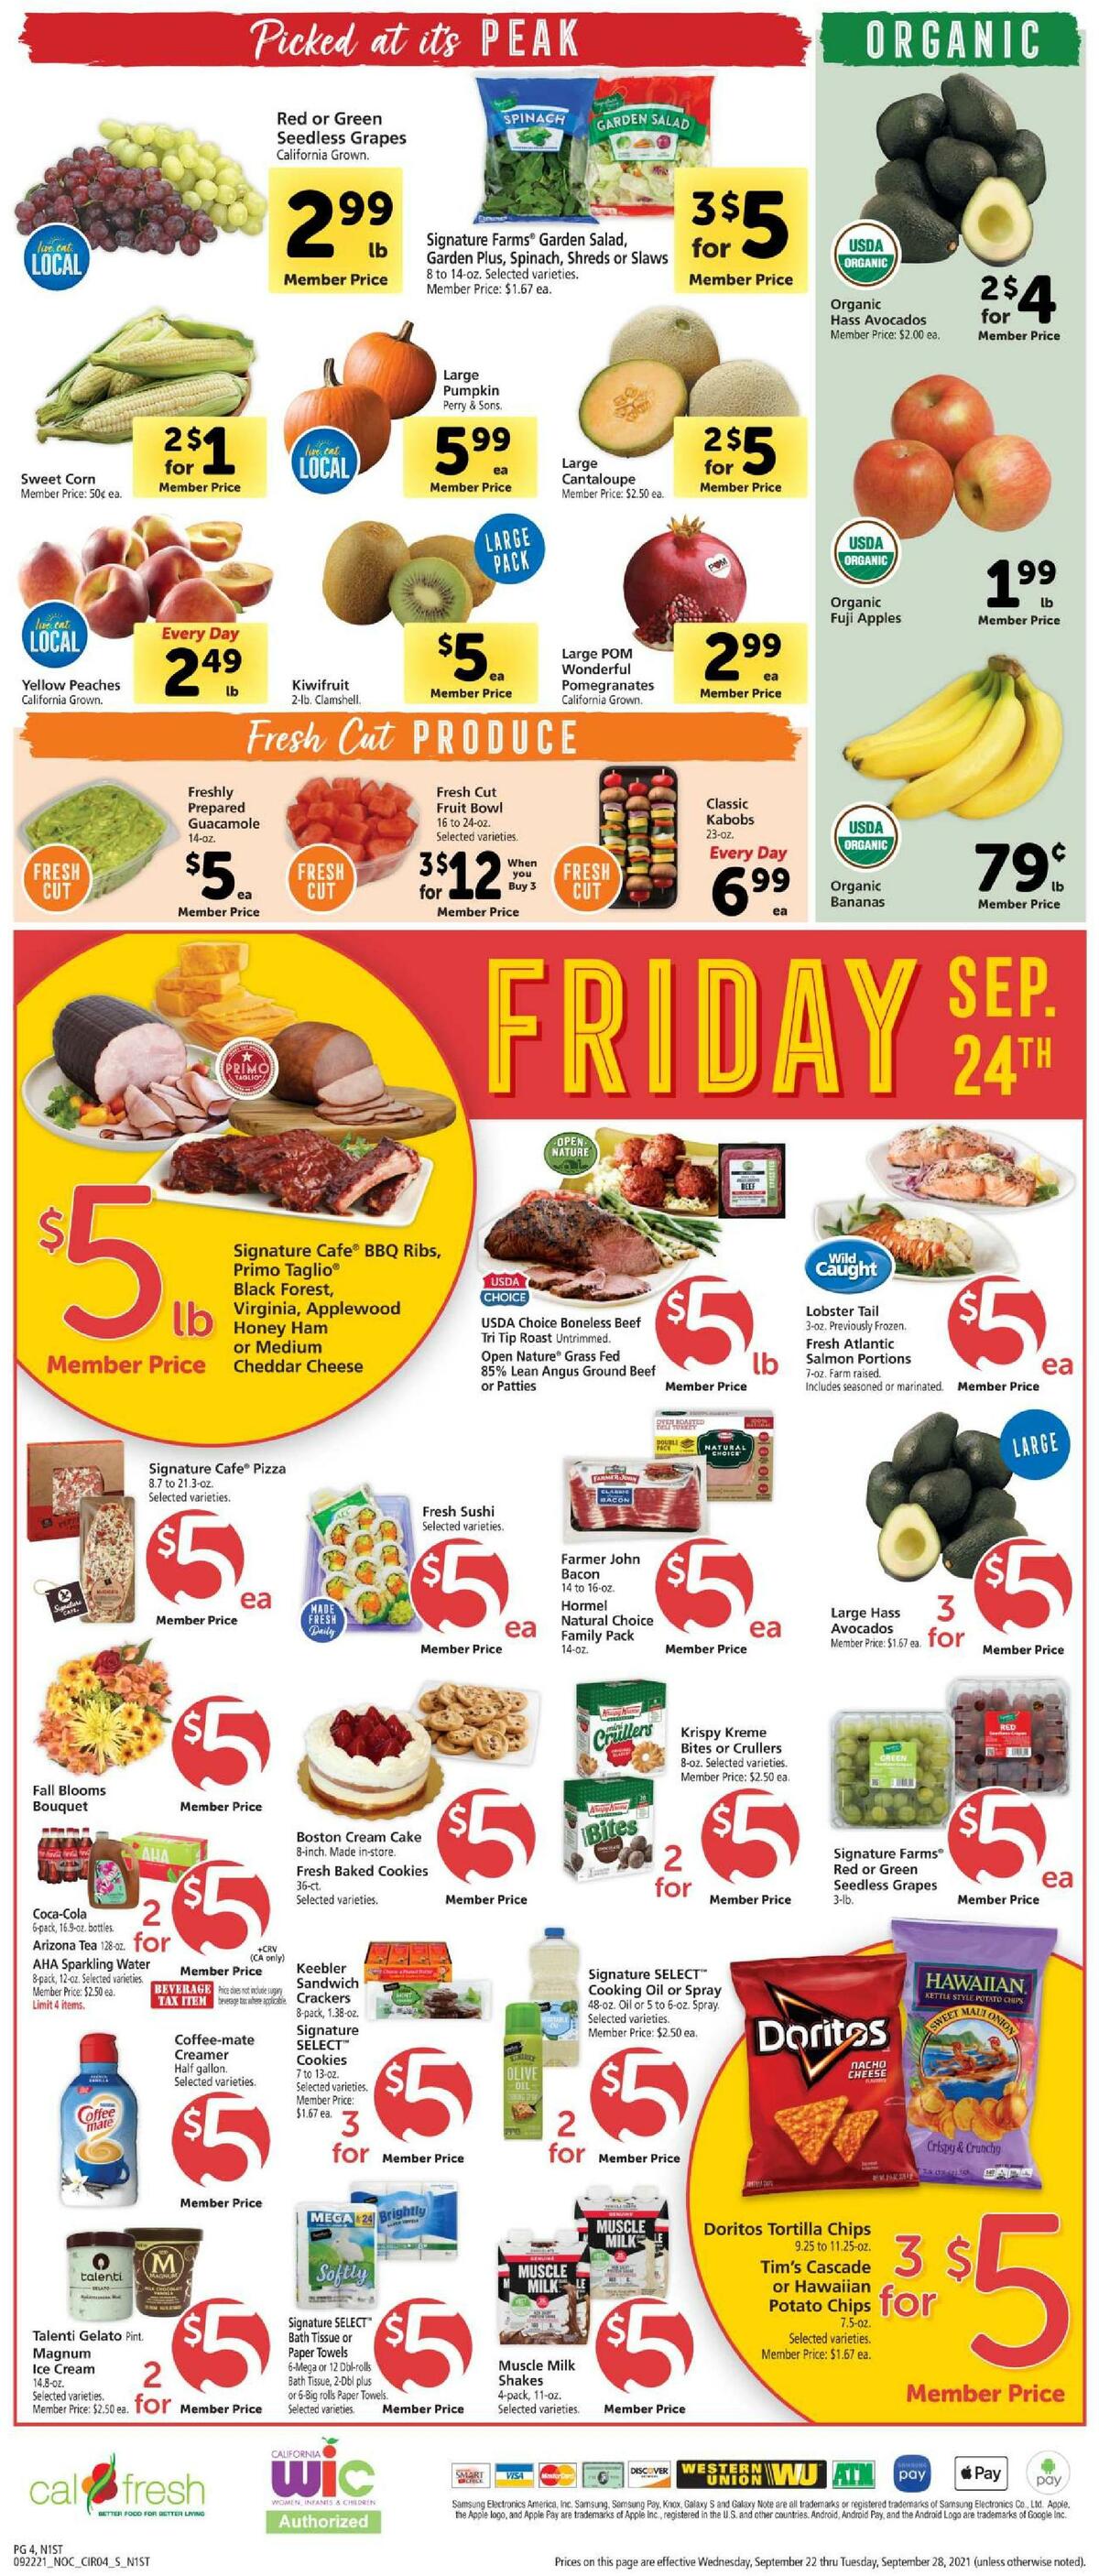 Safeway Weekly Ad from September 22